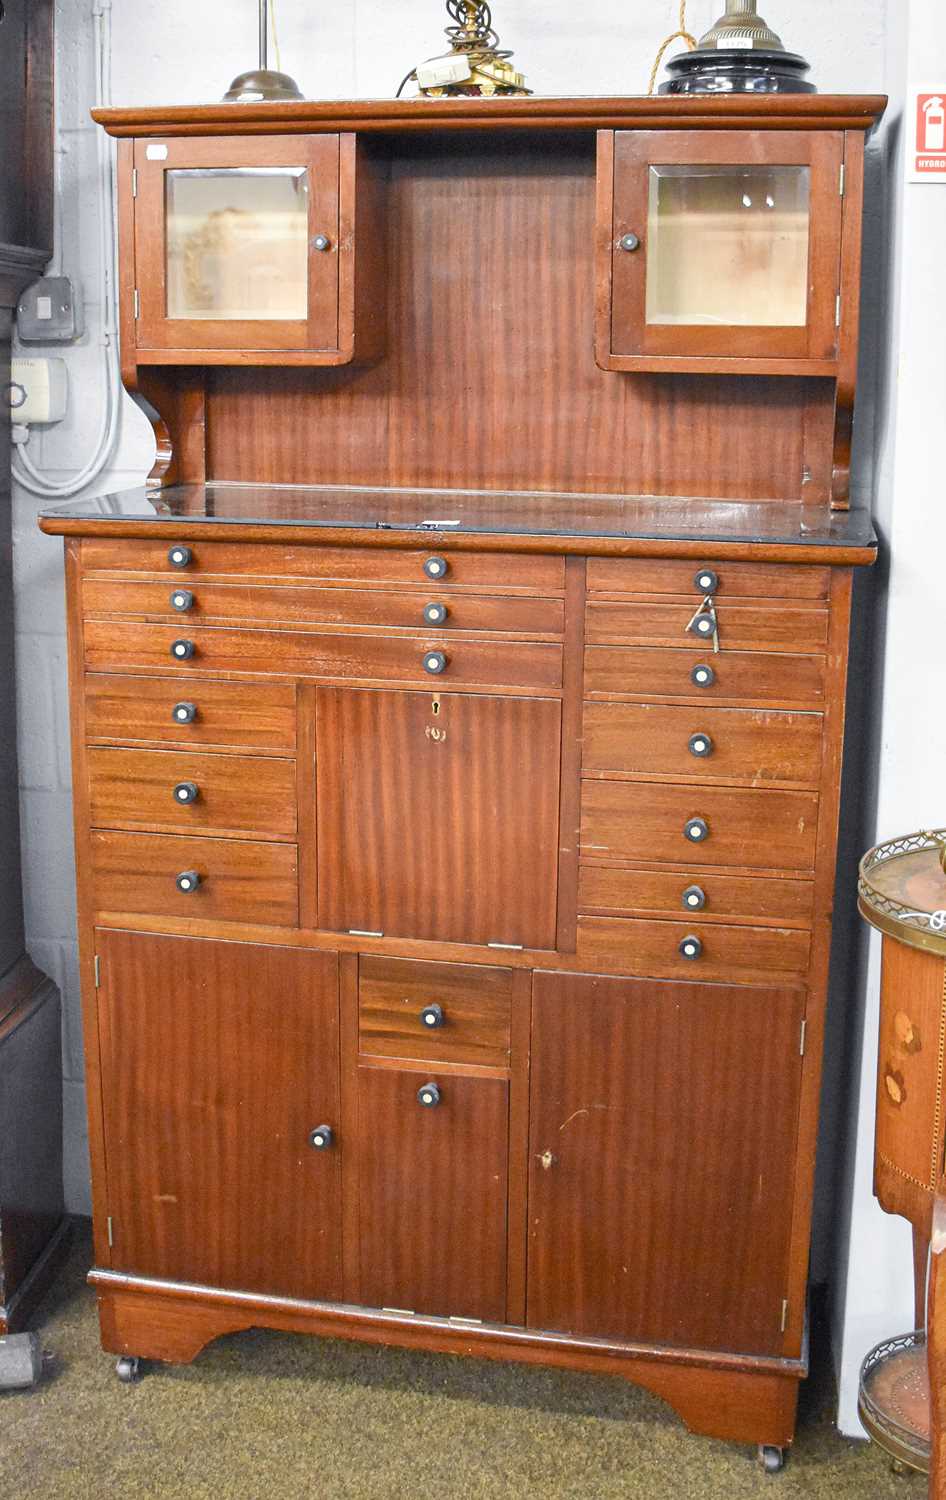 An Early 20th Century Mahogany Dentistry Cabinet, the upper section with two small glazed cupboards,